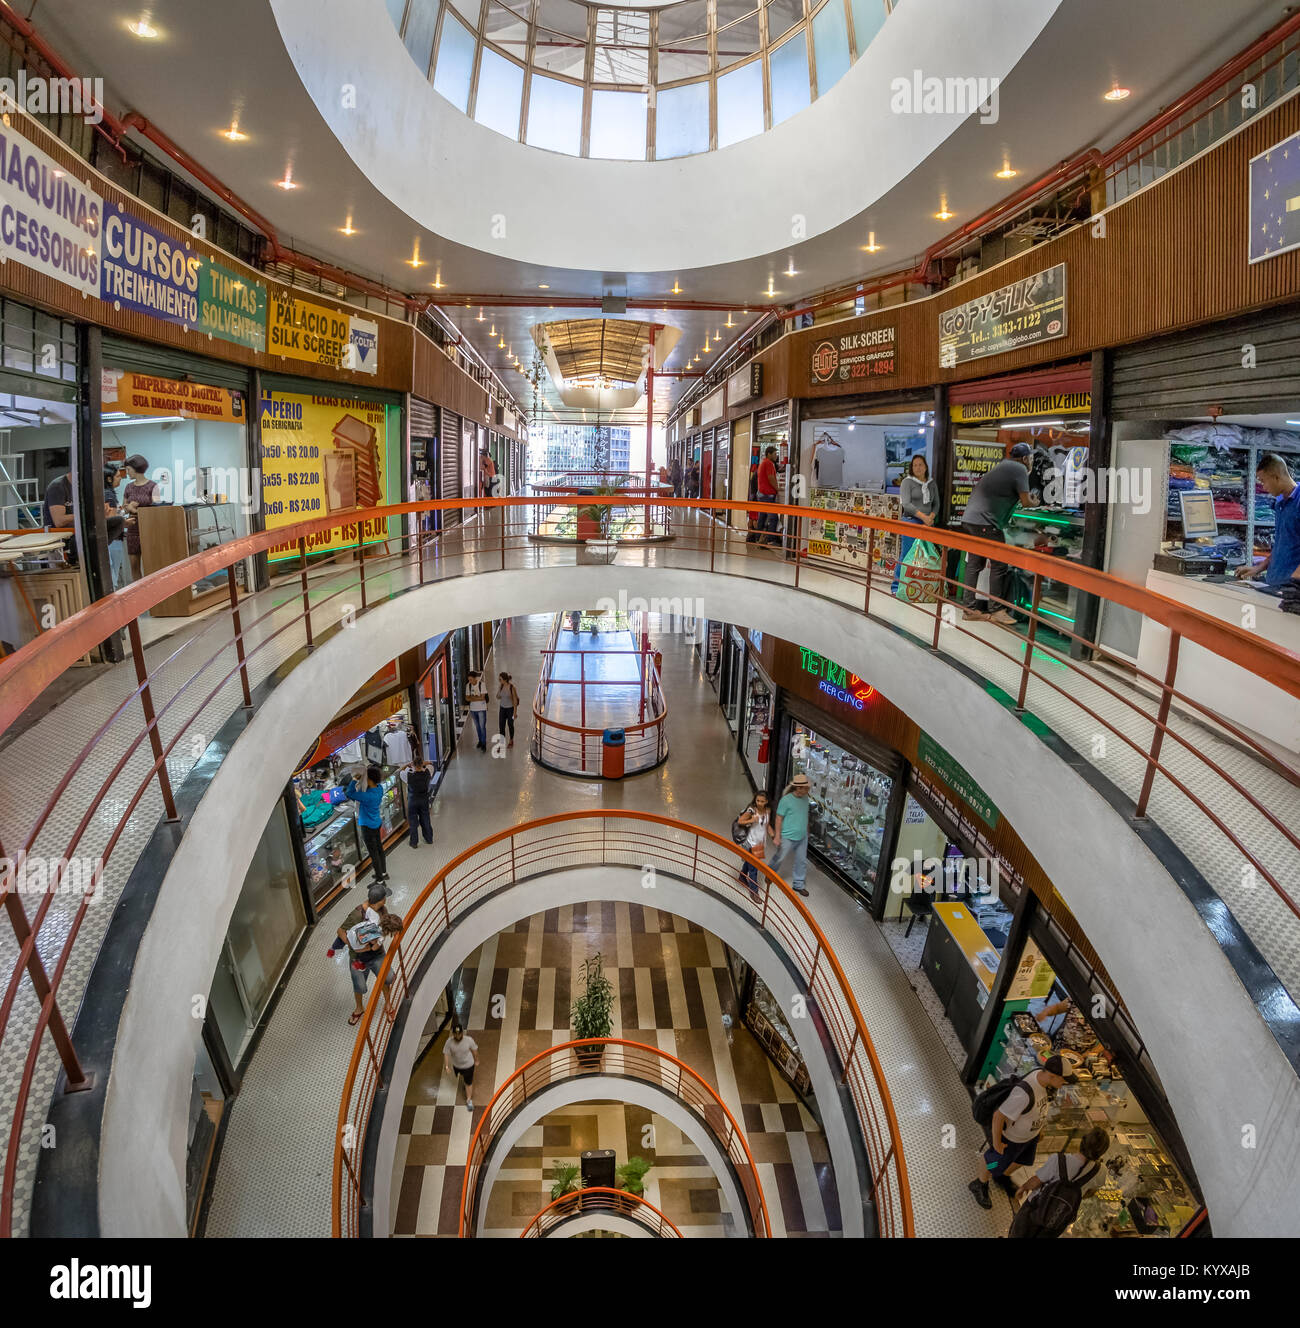 Free Images : ship, crowd, plaza, bazaar, market, marketplace, cruise, hdr,  costa, sns, fortuna, lobby, retail, shopping mall 3971x2233 - - 150742 -  Free stock photos - PxHere